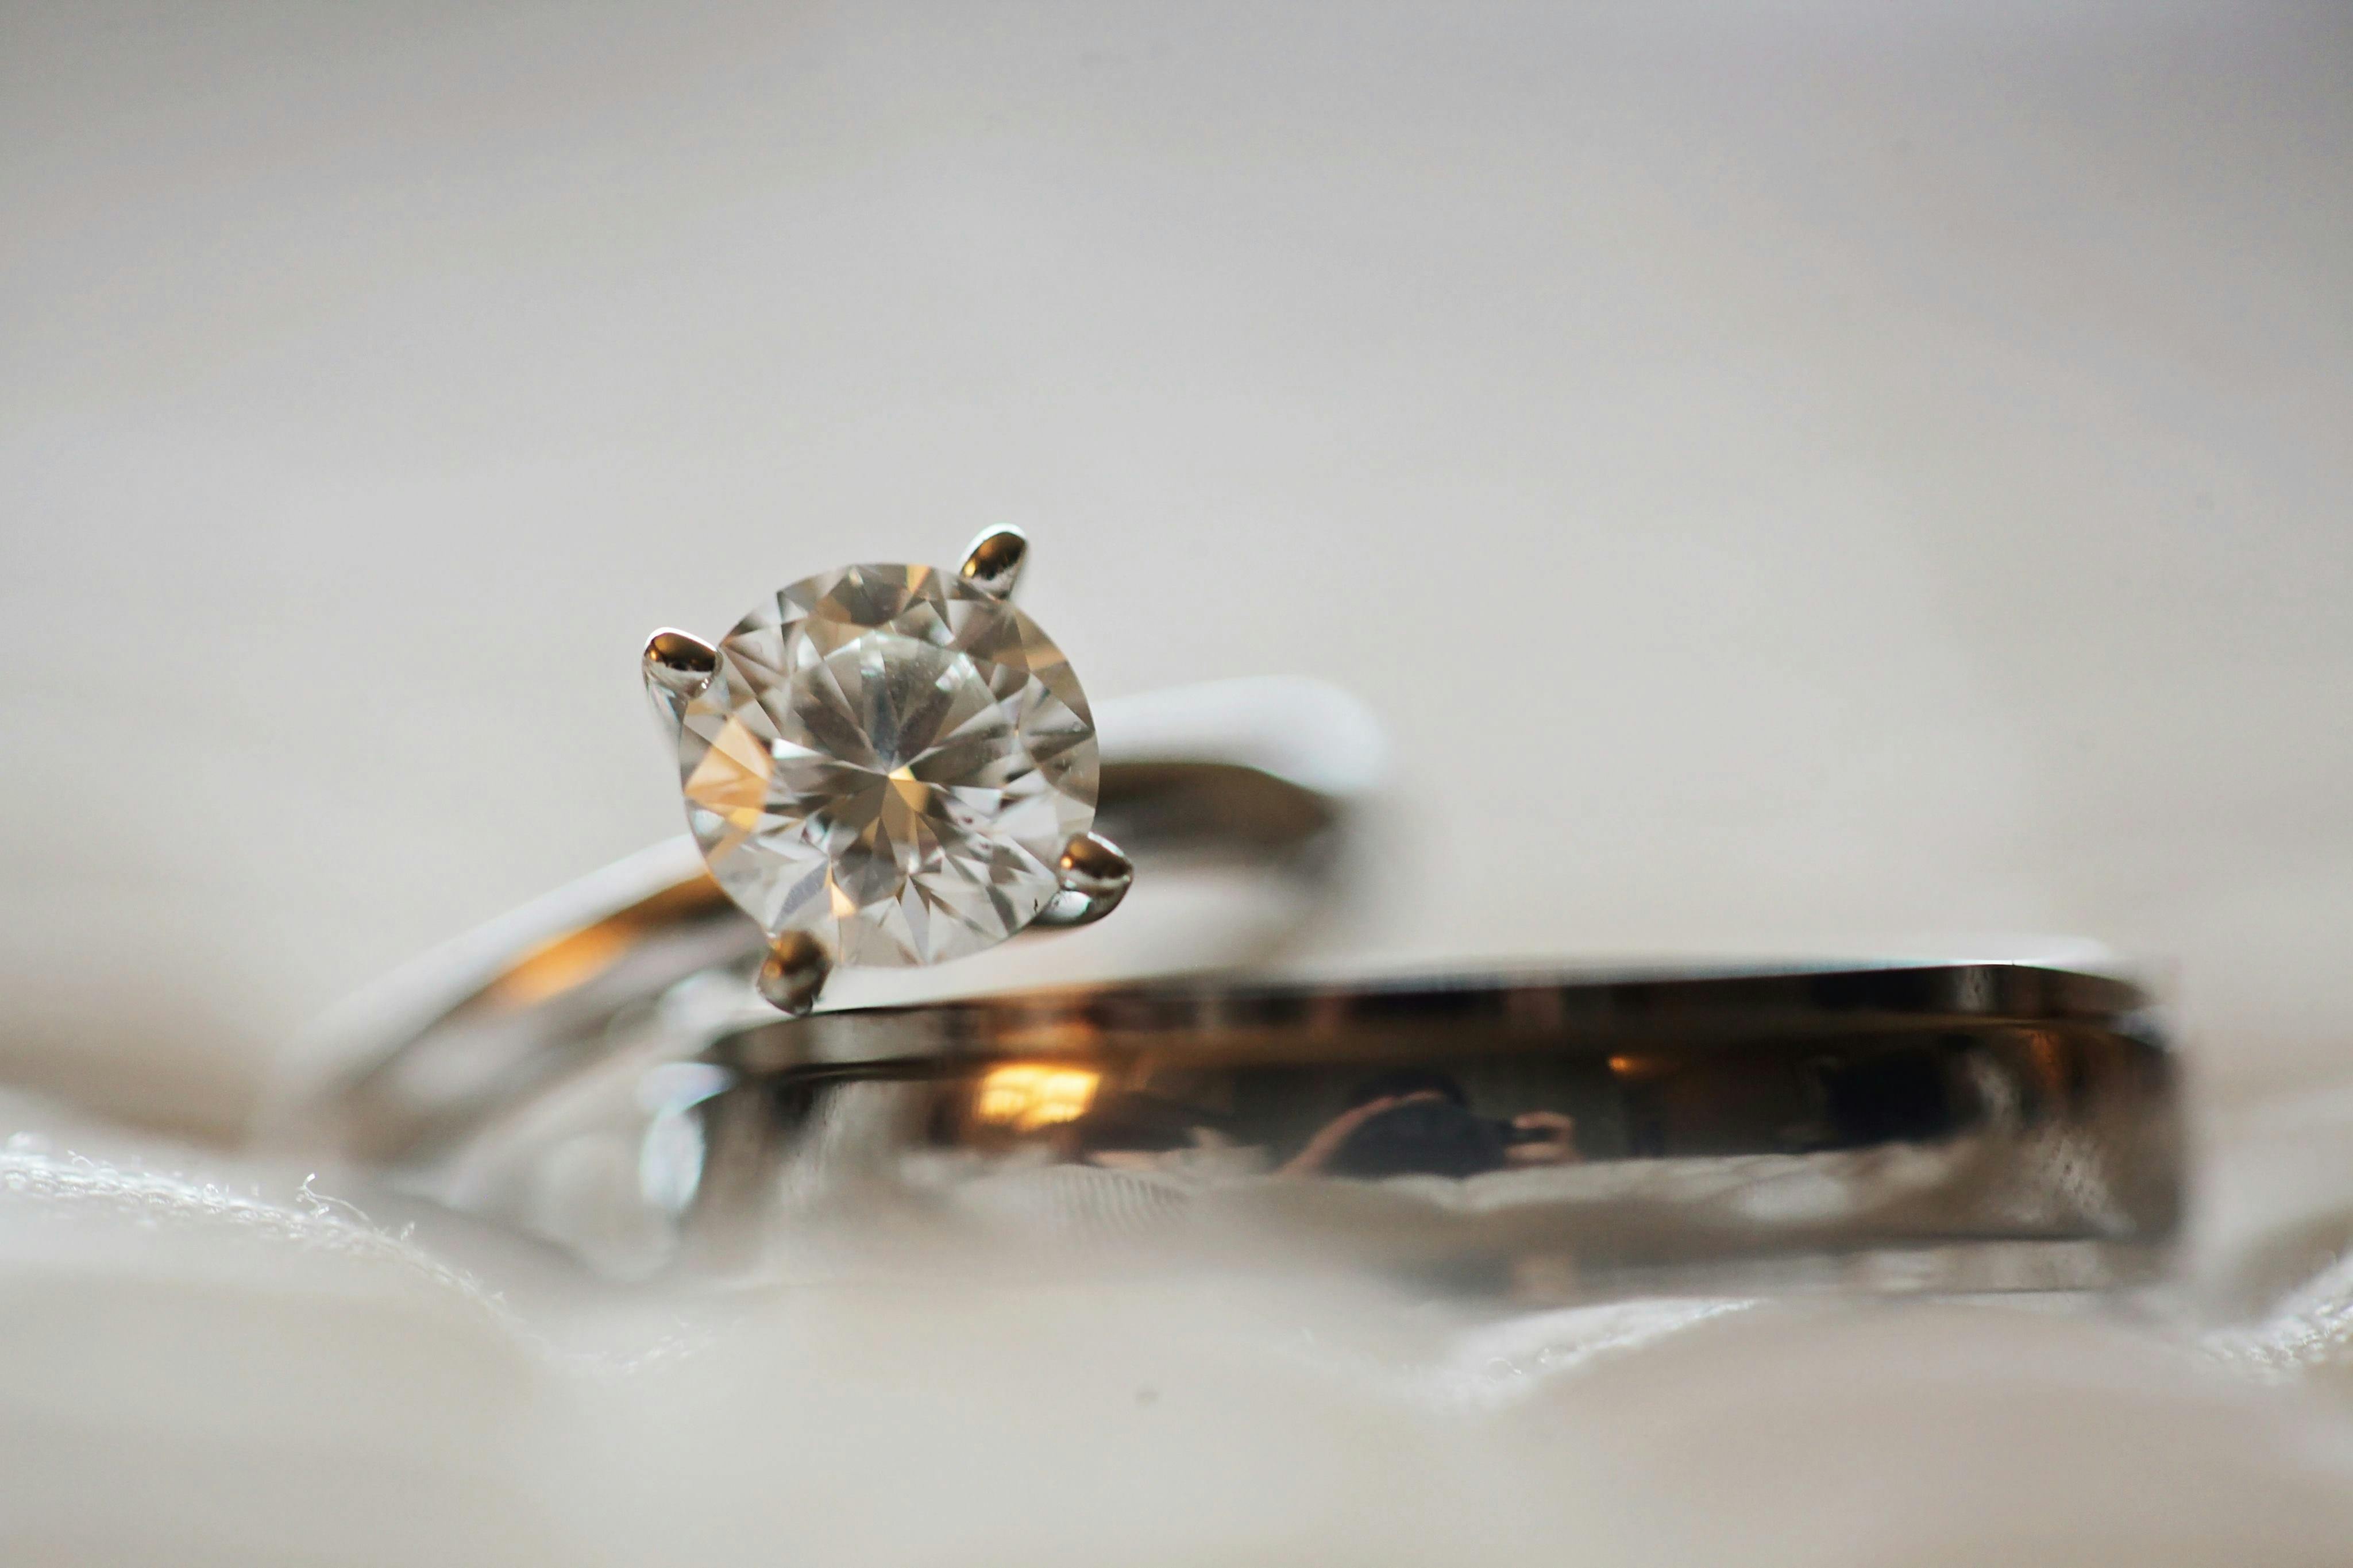 Solitaire Mountings are Gaining Popularity